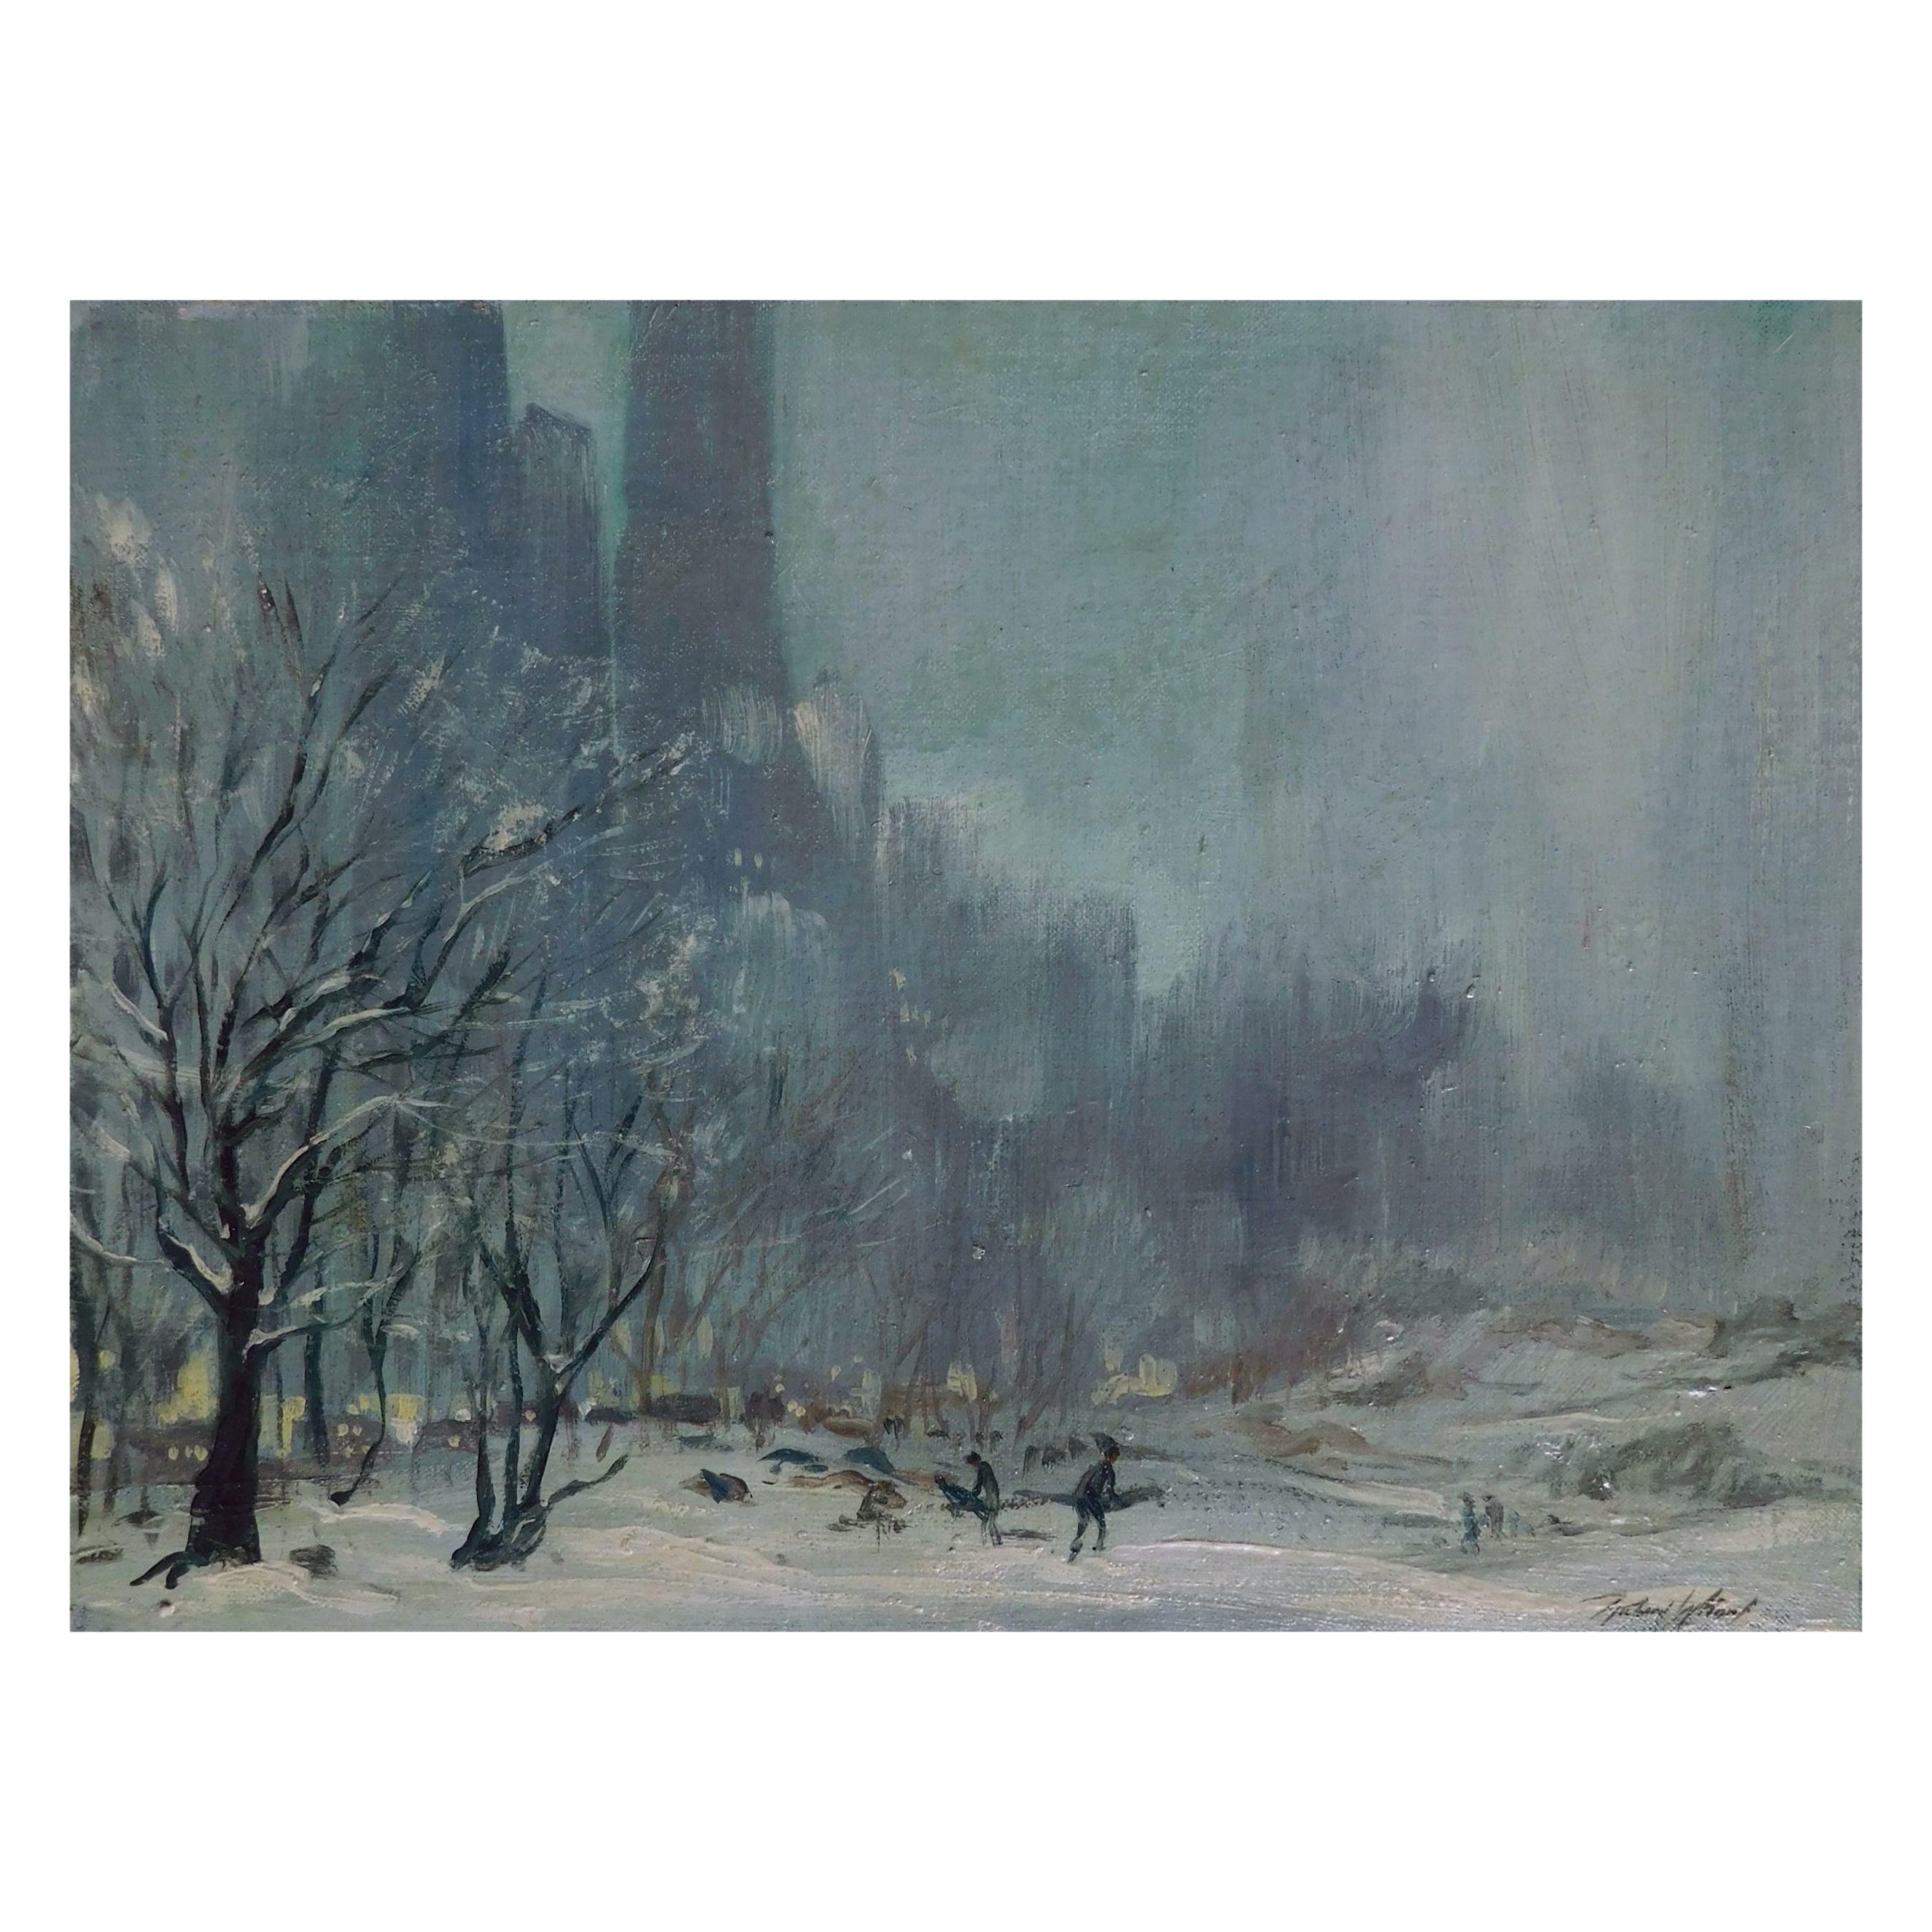 Richard Whorf Oil on Board, circa 1940, New York Subject For Sale